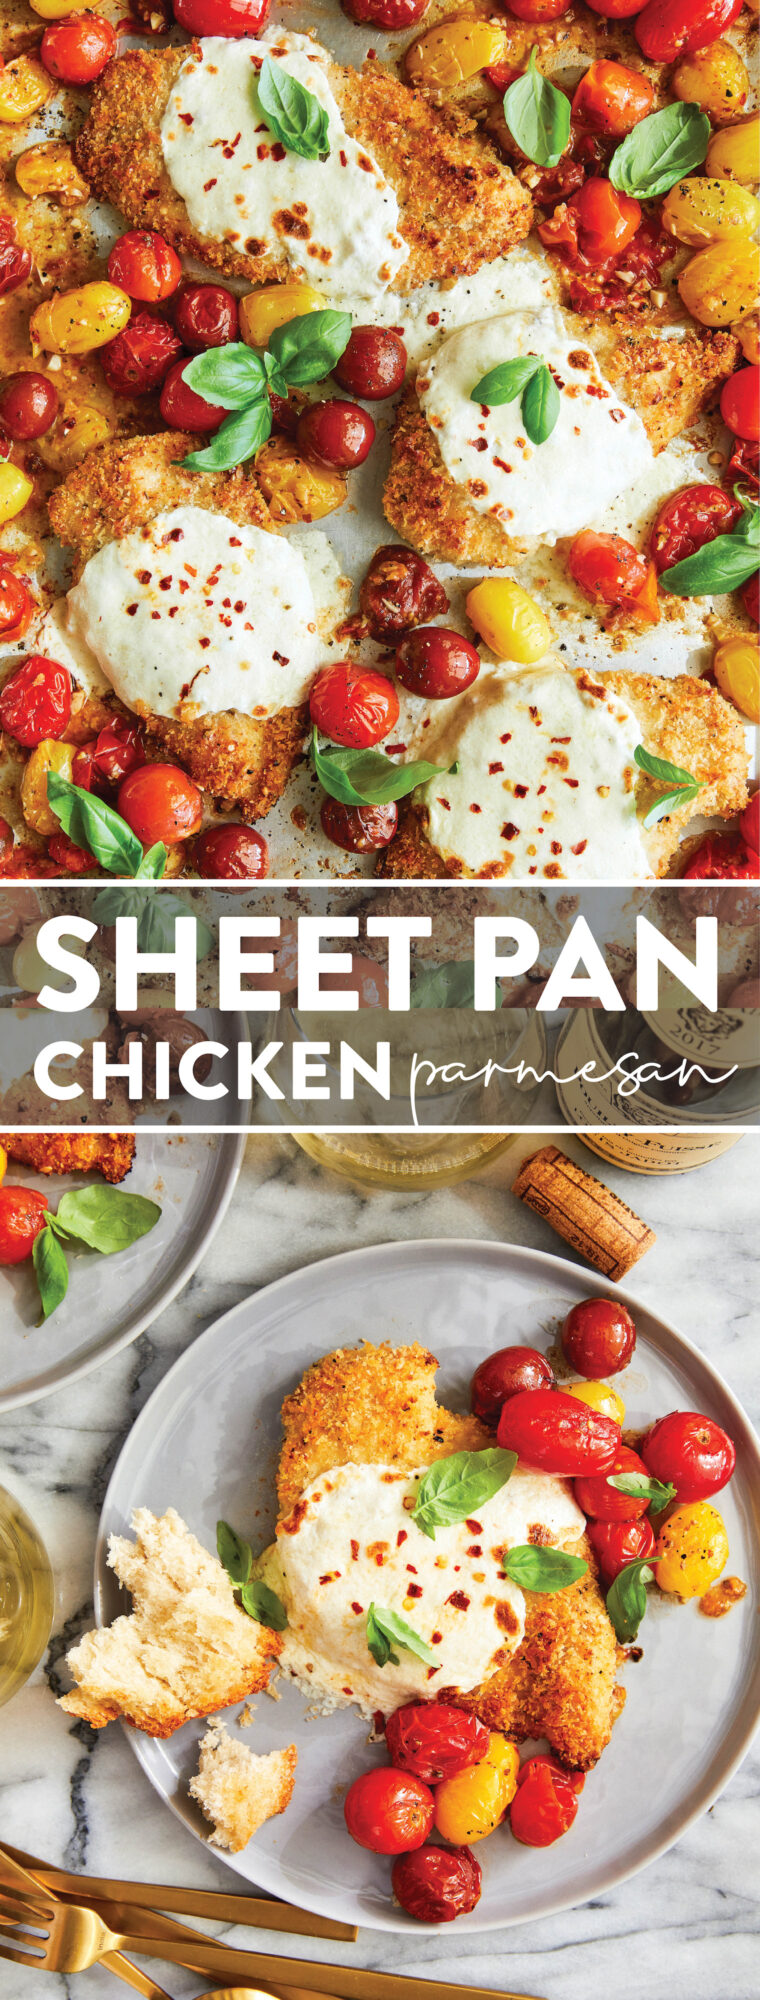 Sheet Pan Chicken Parmesan - No mess, no fuss, and no frying. Completely BAKED amazingly crisp-tender chicken parmesan for the entire family!